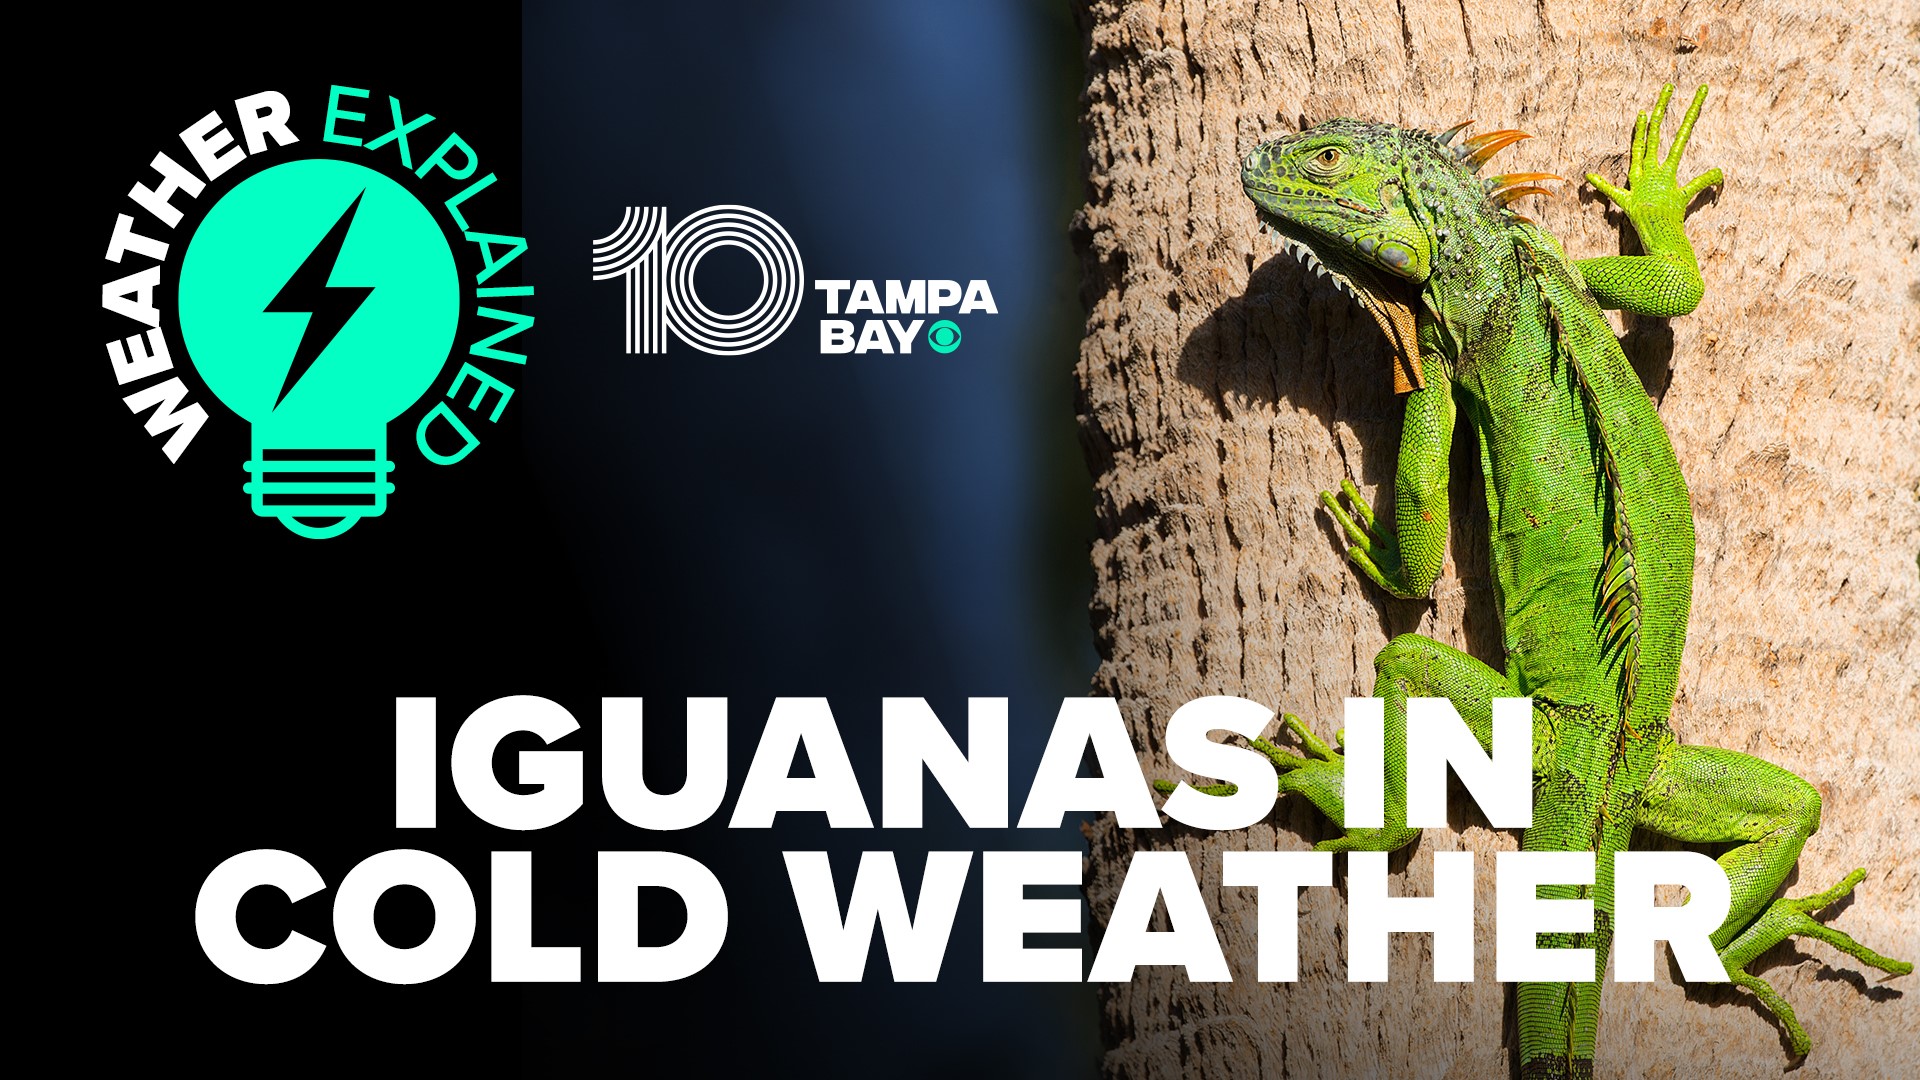 10 Tampa Bay chief meteorologist Bobby Deskins explains how iguanas are affected by cold weather.